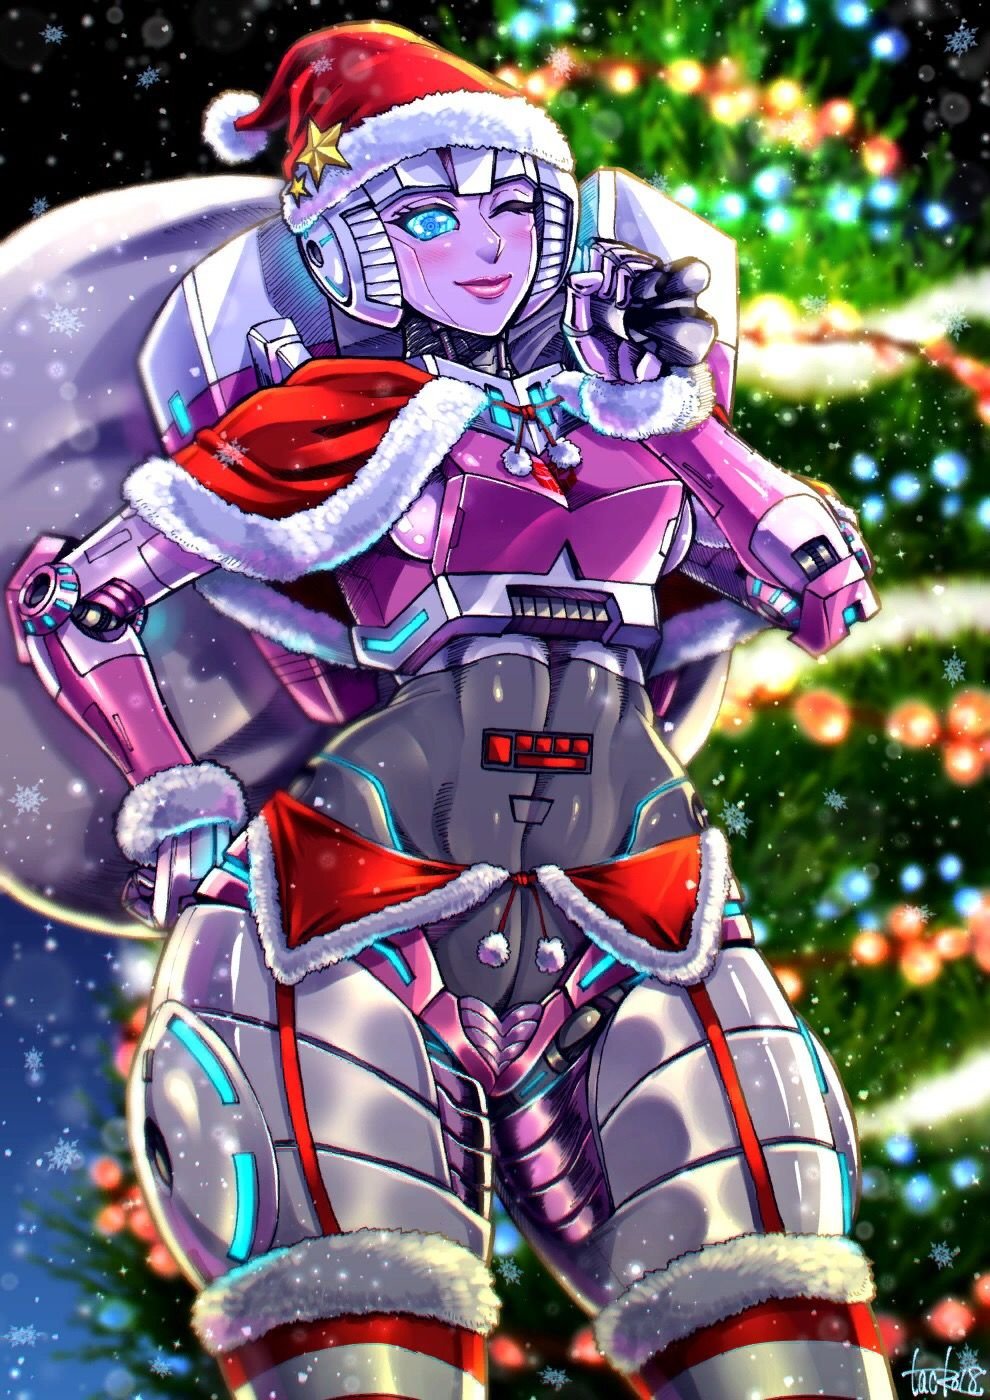 Desmenuzar brillante entrar Spider Island Slim on Twitter: "Why yes, this sexy Arcee pic was my phone  wallpaper for the Christmas season this year. #transformers #arcee  https://t.co/oLeX5ypjMV" / Twitter